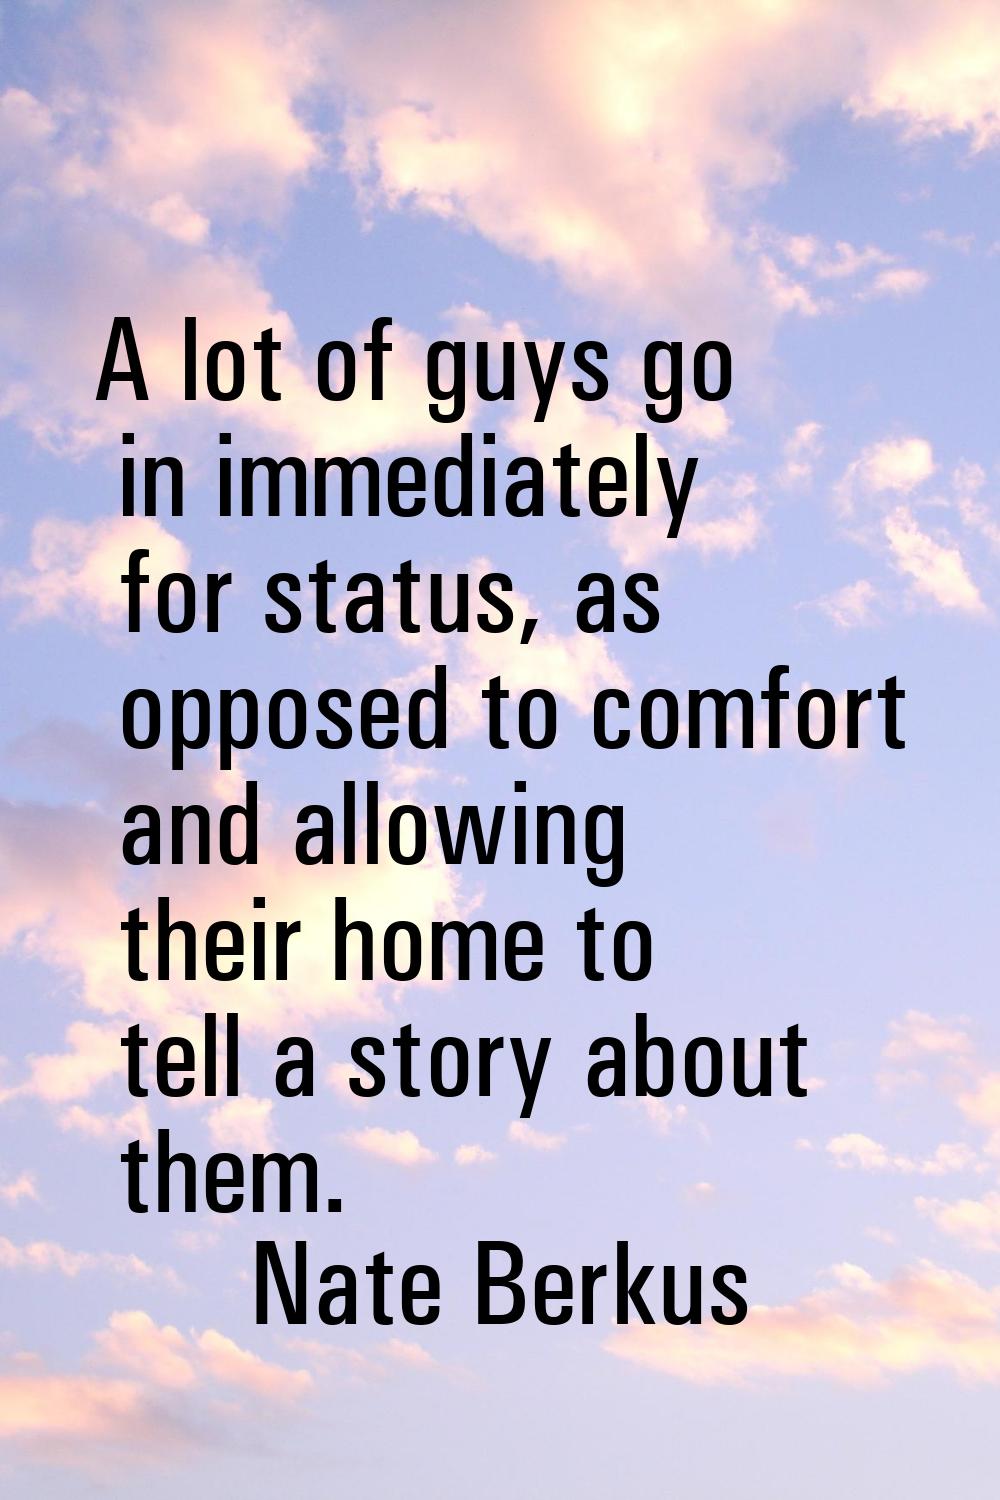 A lot of guys go in immediately for status, as opposed to comfort and allowing their home to tell a